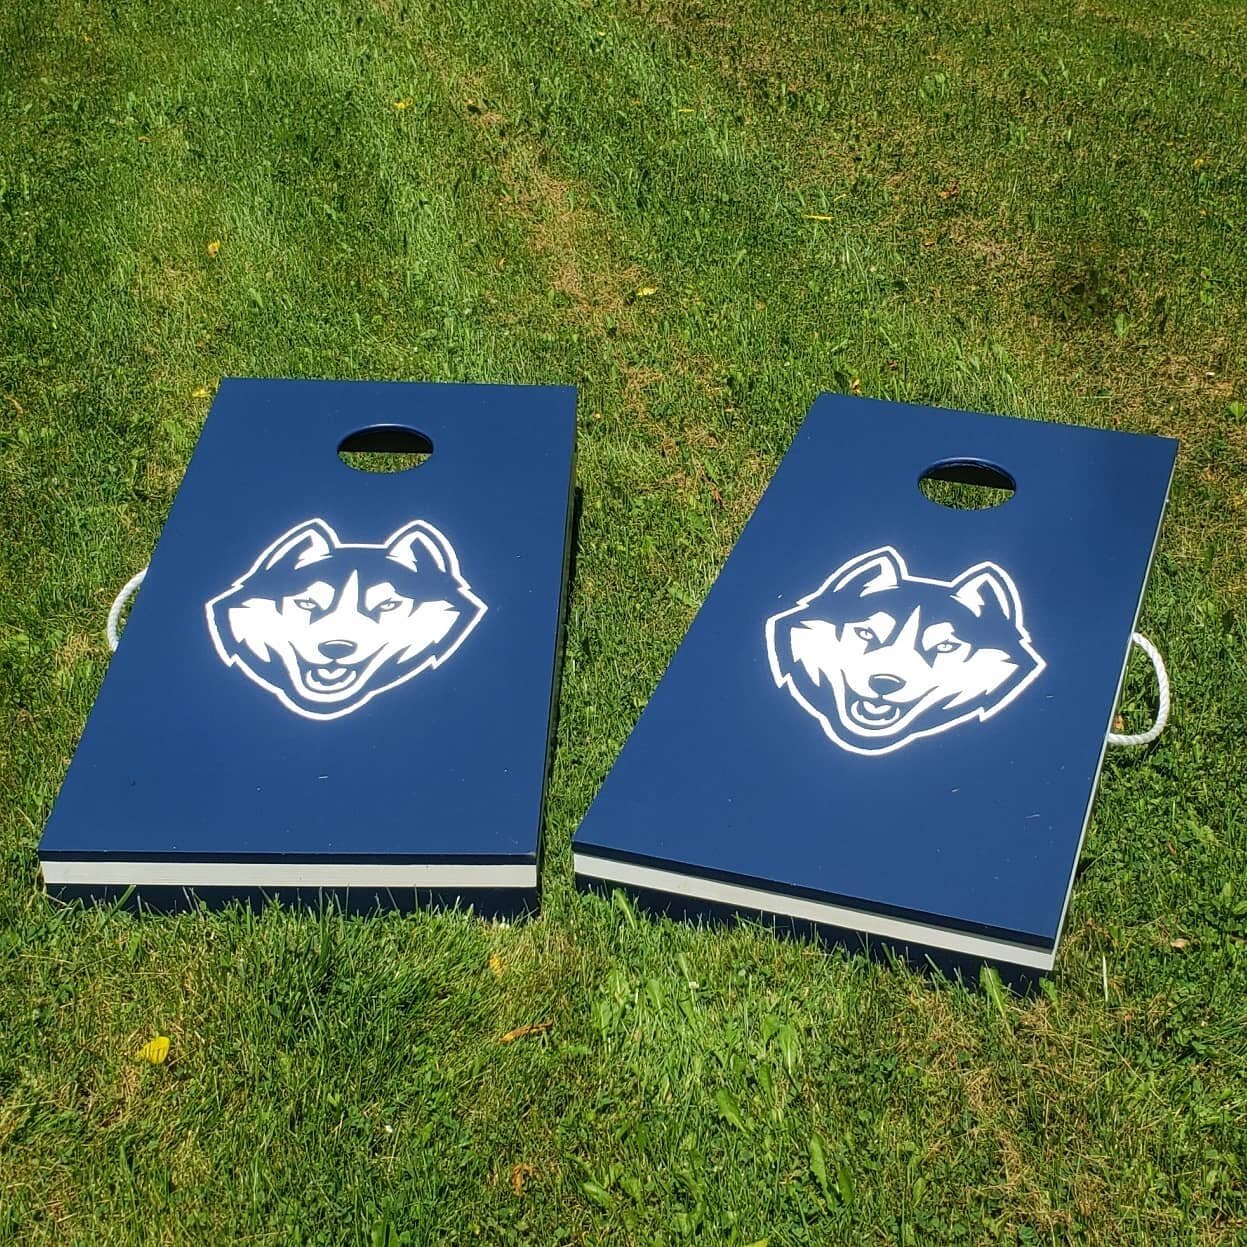 One of my favorite parts of fall is the yard games, and no yard game collection is complete without a cornhole set! Would I even be a woodworker if I didn't make at least one cornhole set?? Each set is hand painted and protected with durable outdoor 